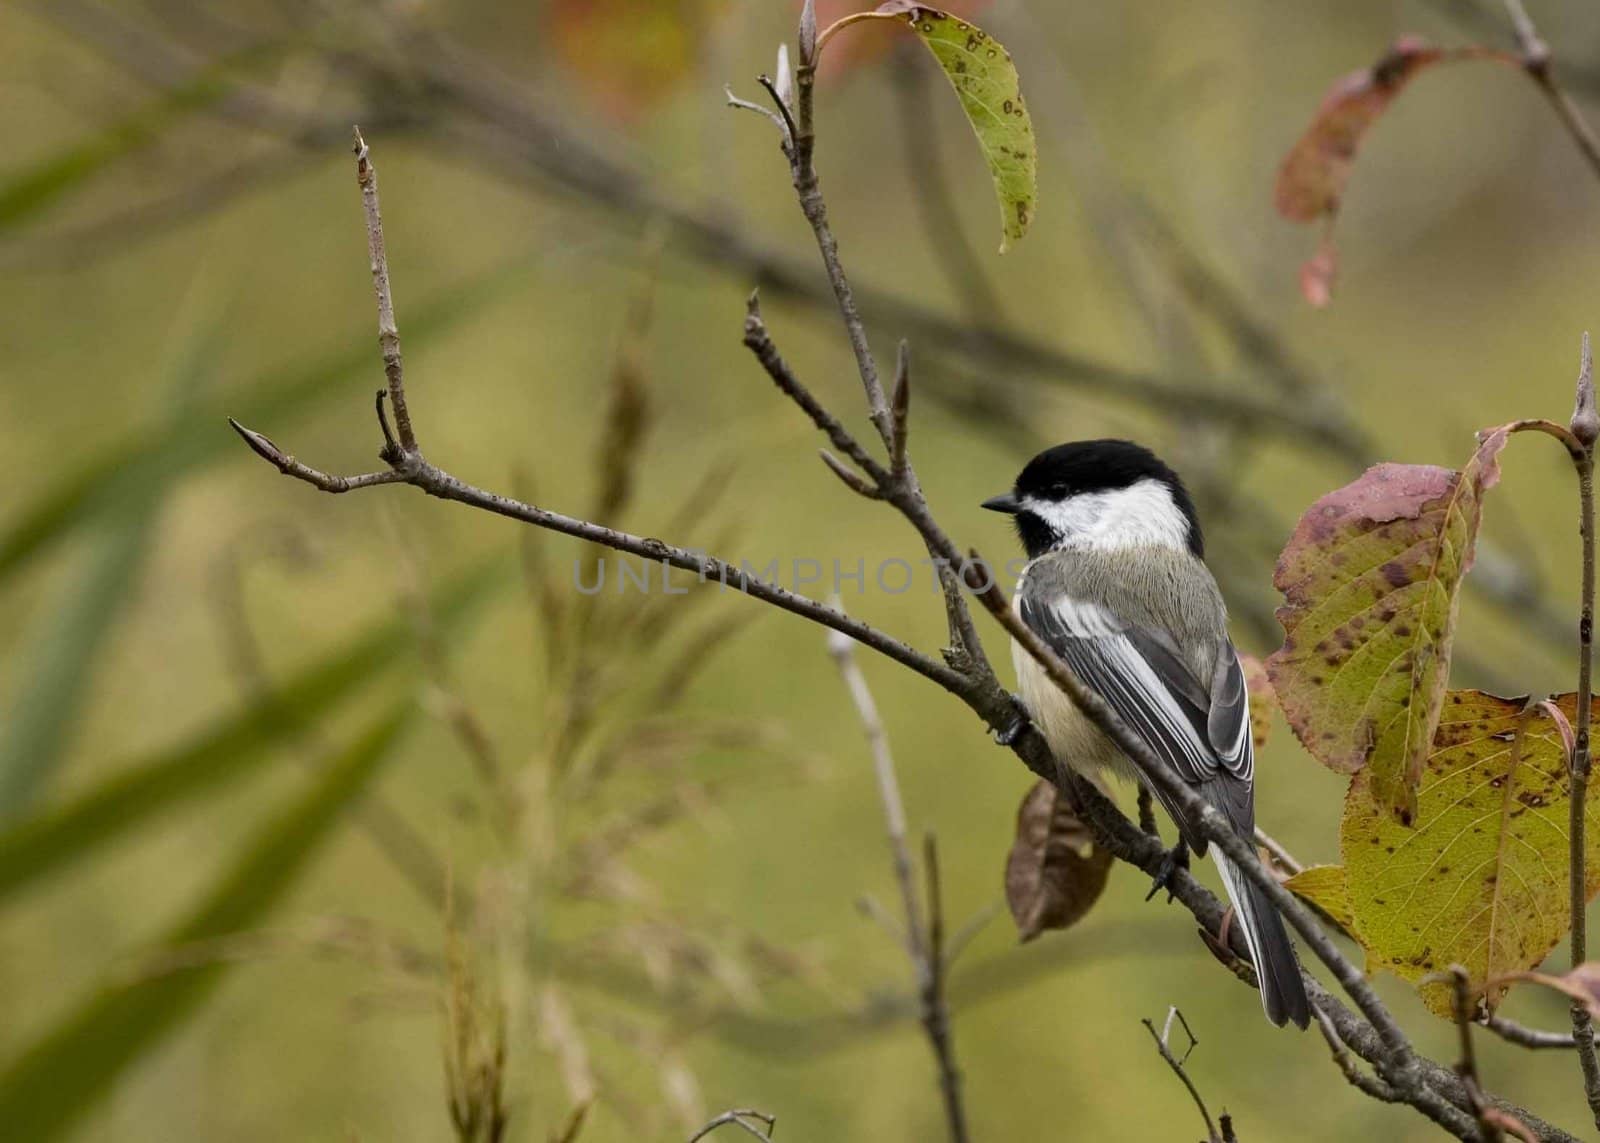 Black-capped Chickadee (Parus atricapillus) by brm1949